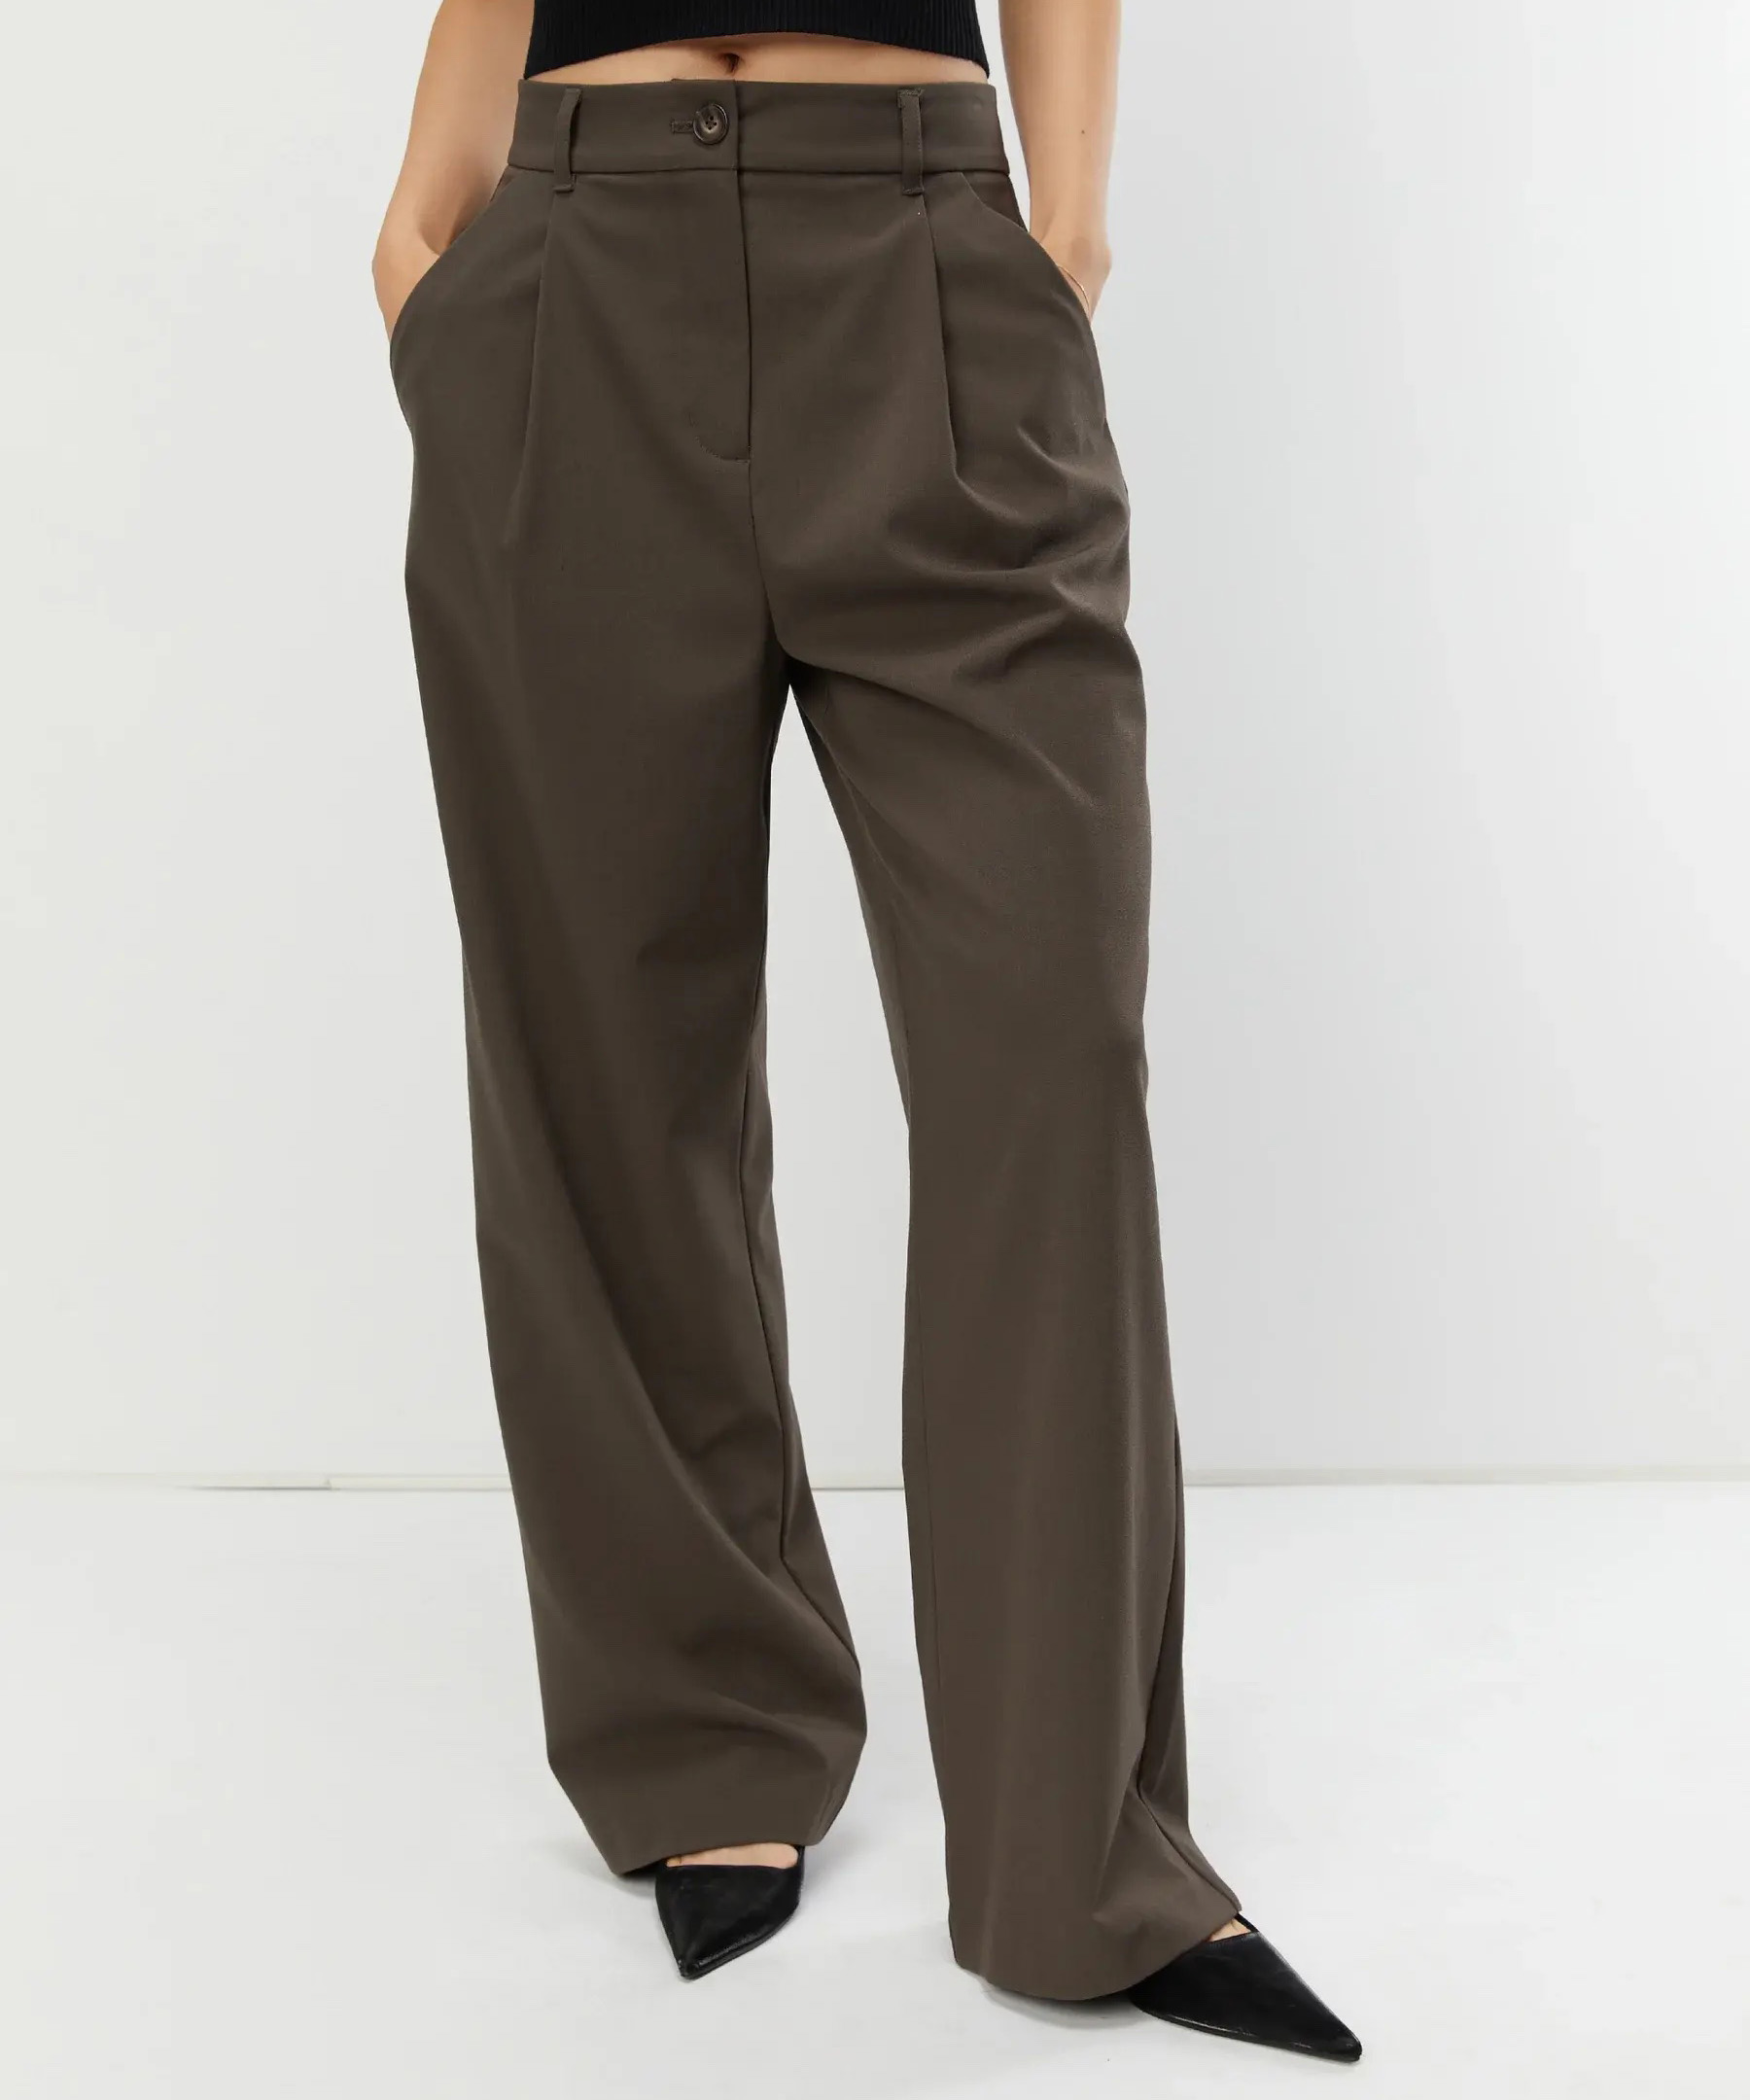 oak and fort trouser